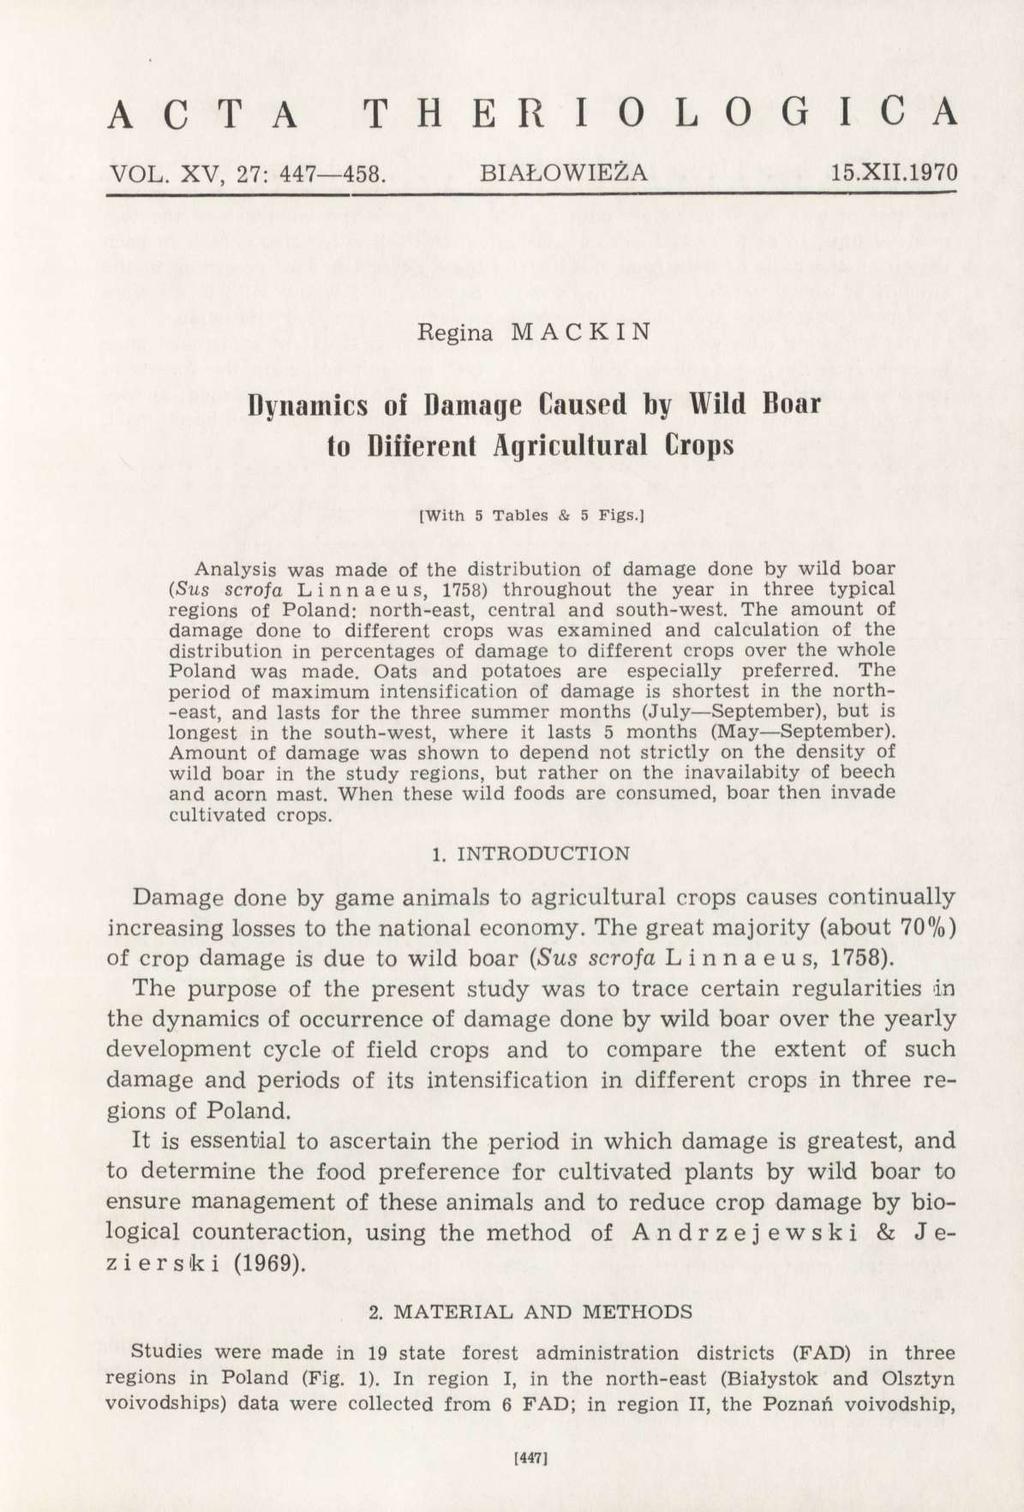 A C T A T H E R I O L O G I C A VOL. XV, 27: 447 458. BIAŁOWIEŻA 15.XII.1970 Regina MAC KIN Dynamics of Damage Caused by Wild Boar to Different Agricultural Crops [With 5 Tables & 5 Figs.